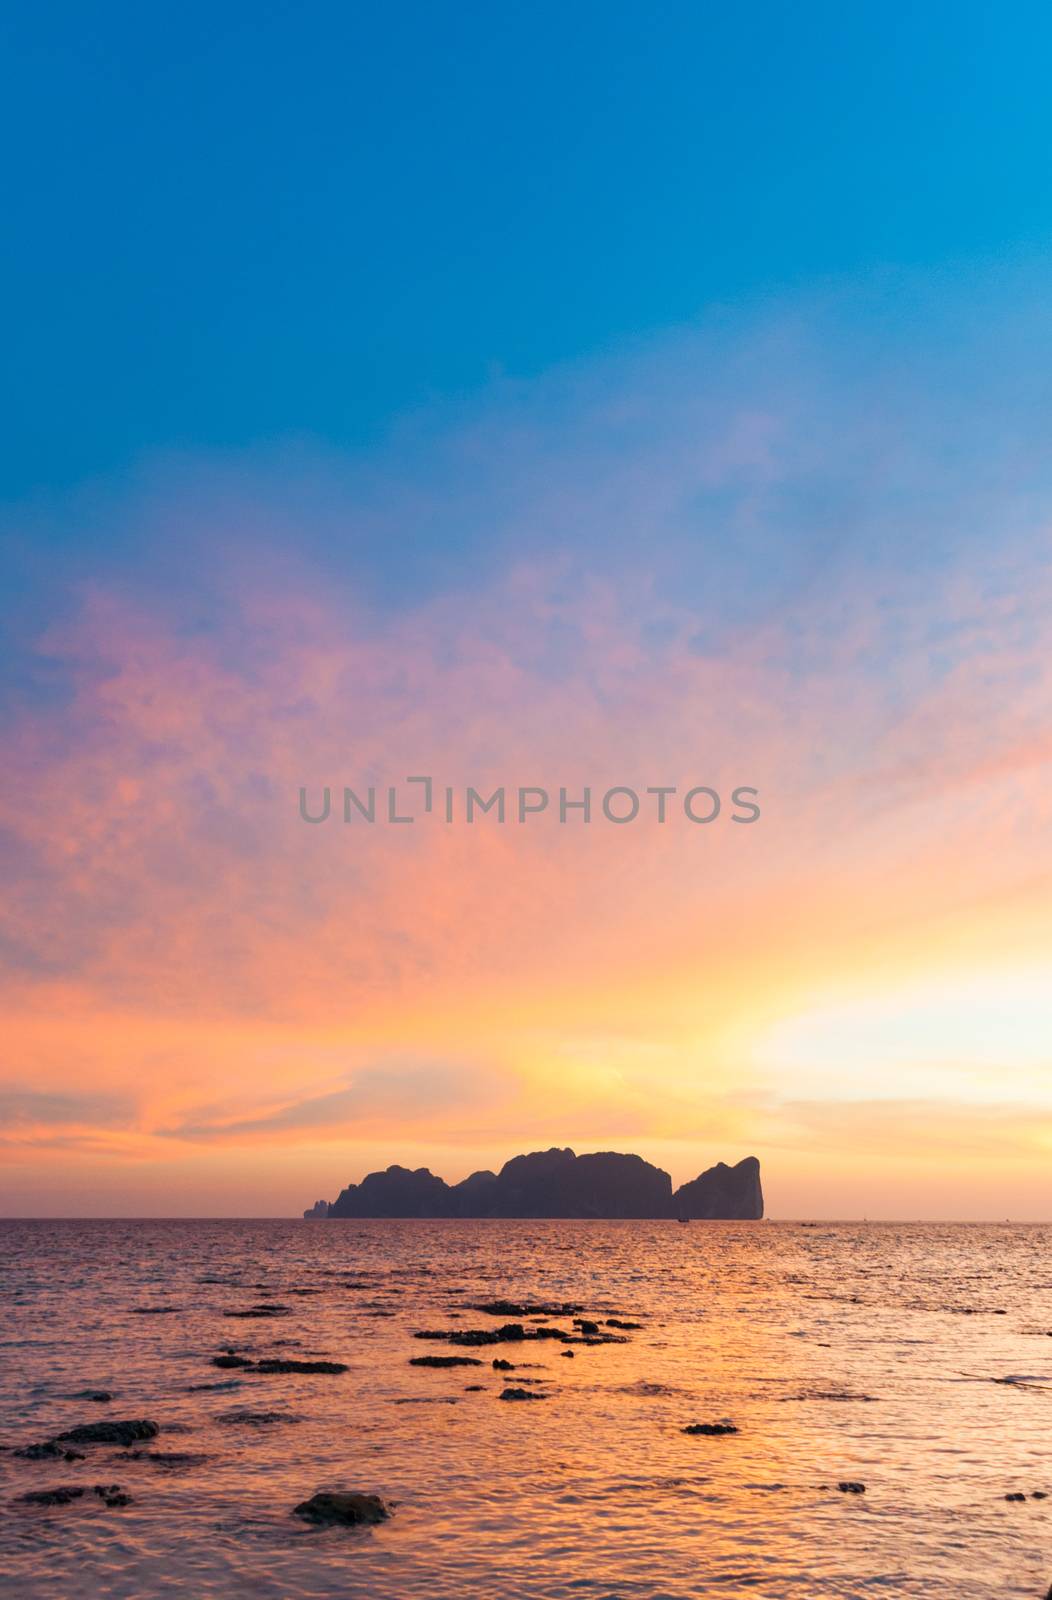 Phi-Phi Lee island in colorful romantic sunset. by kasto